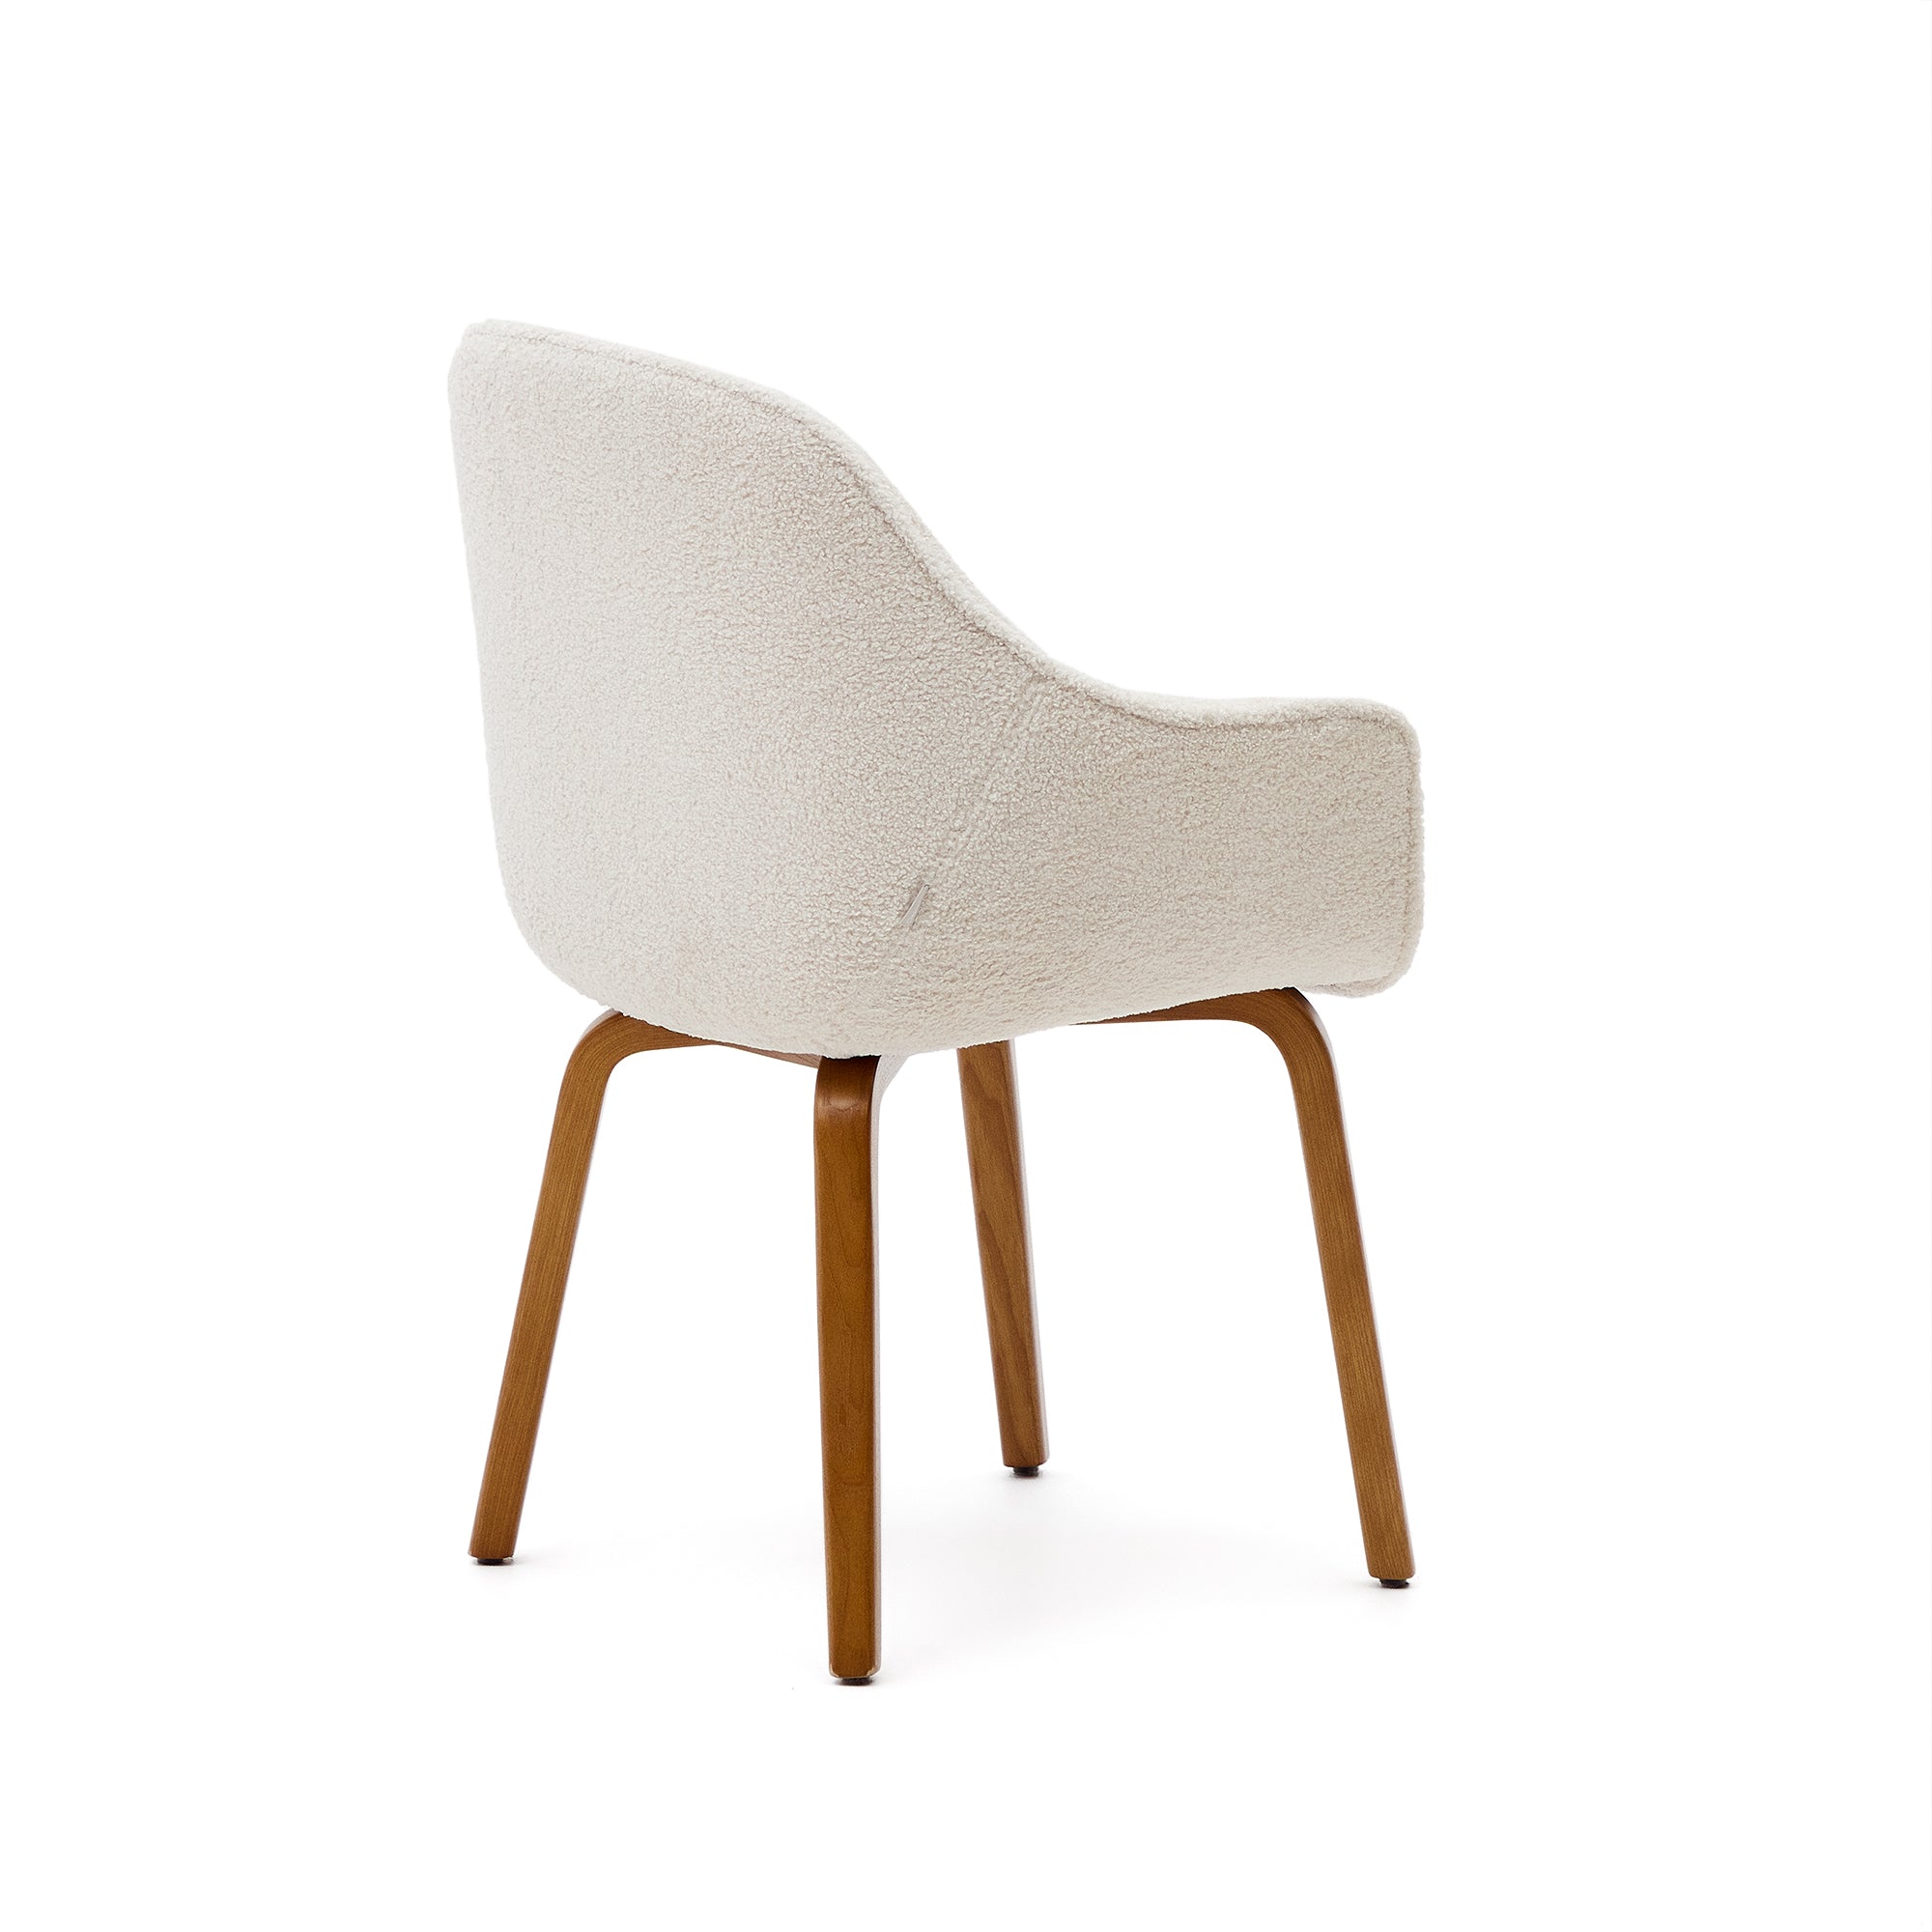 Aleli chair in white shearling with solid ash wood legs and walnut finish